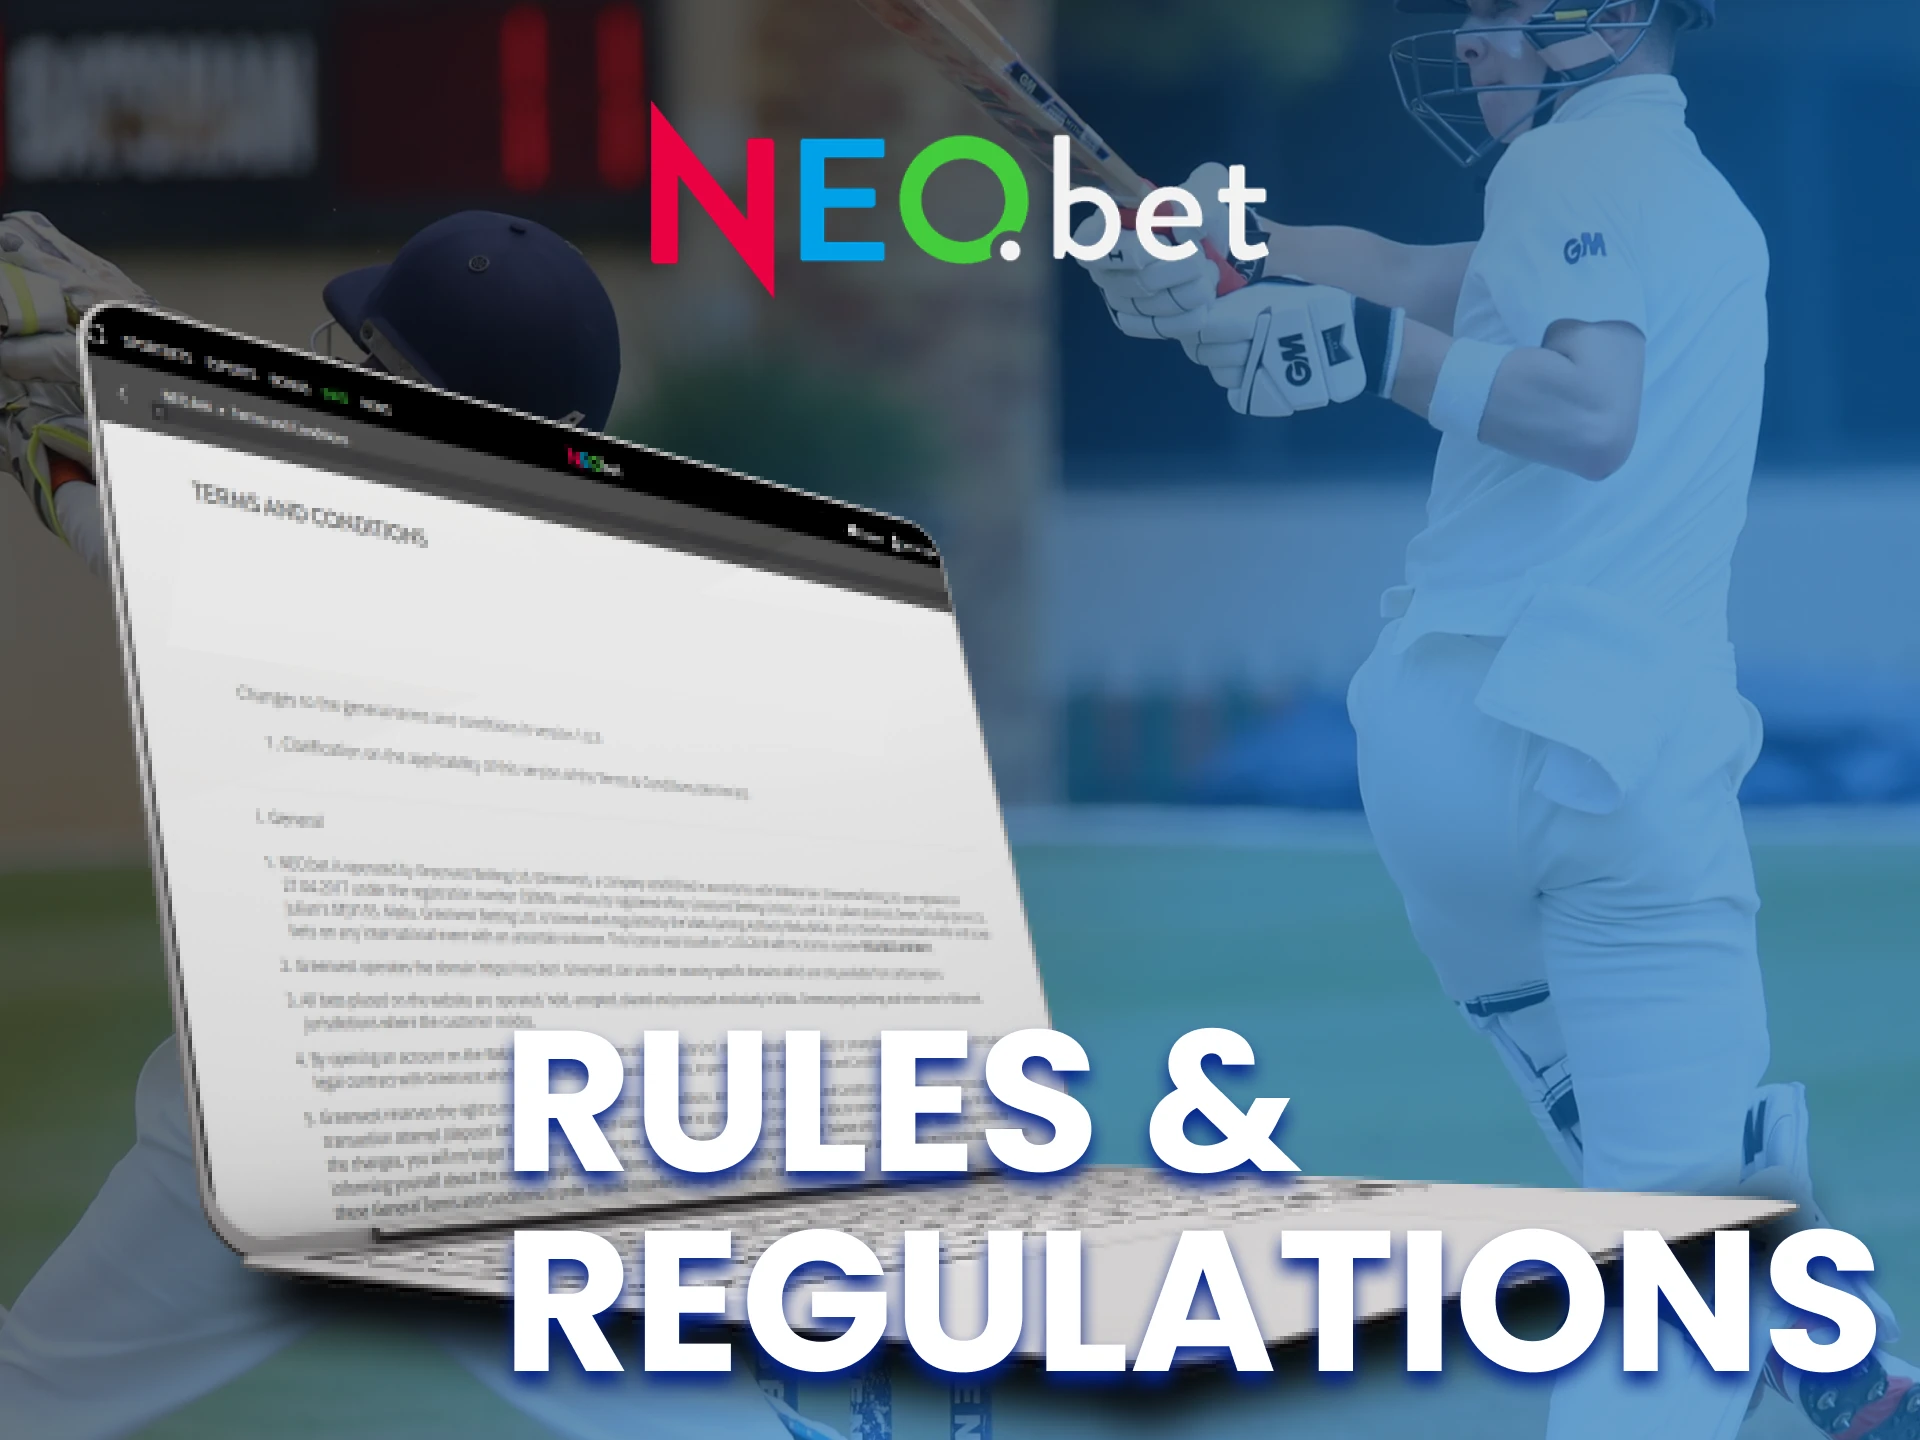 NEO.bet has simple and clear rules, read them.